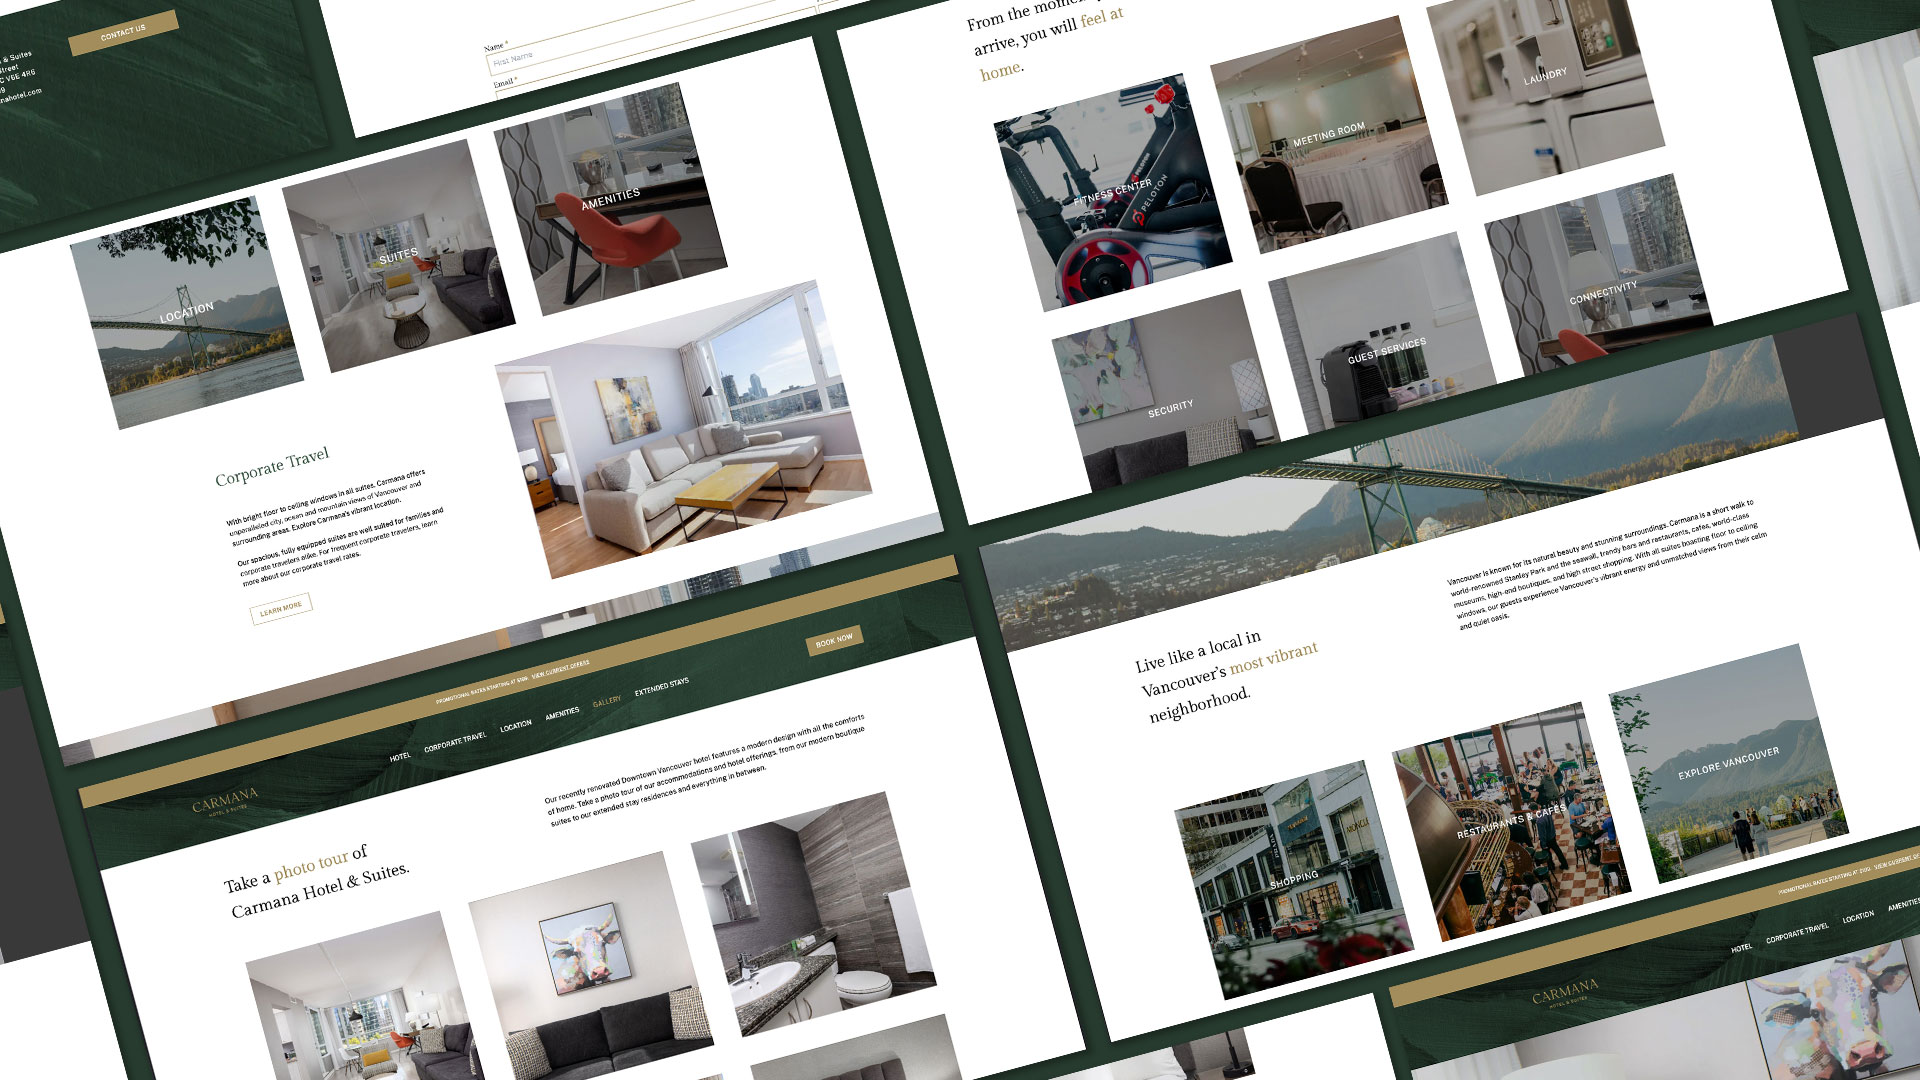 Tiled pages of Carmana Hotel & Suites website